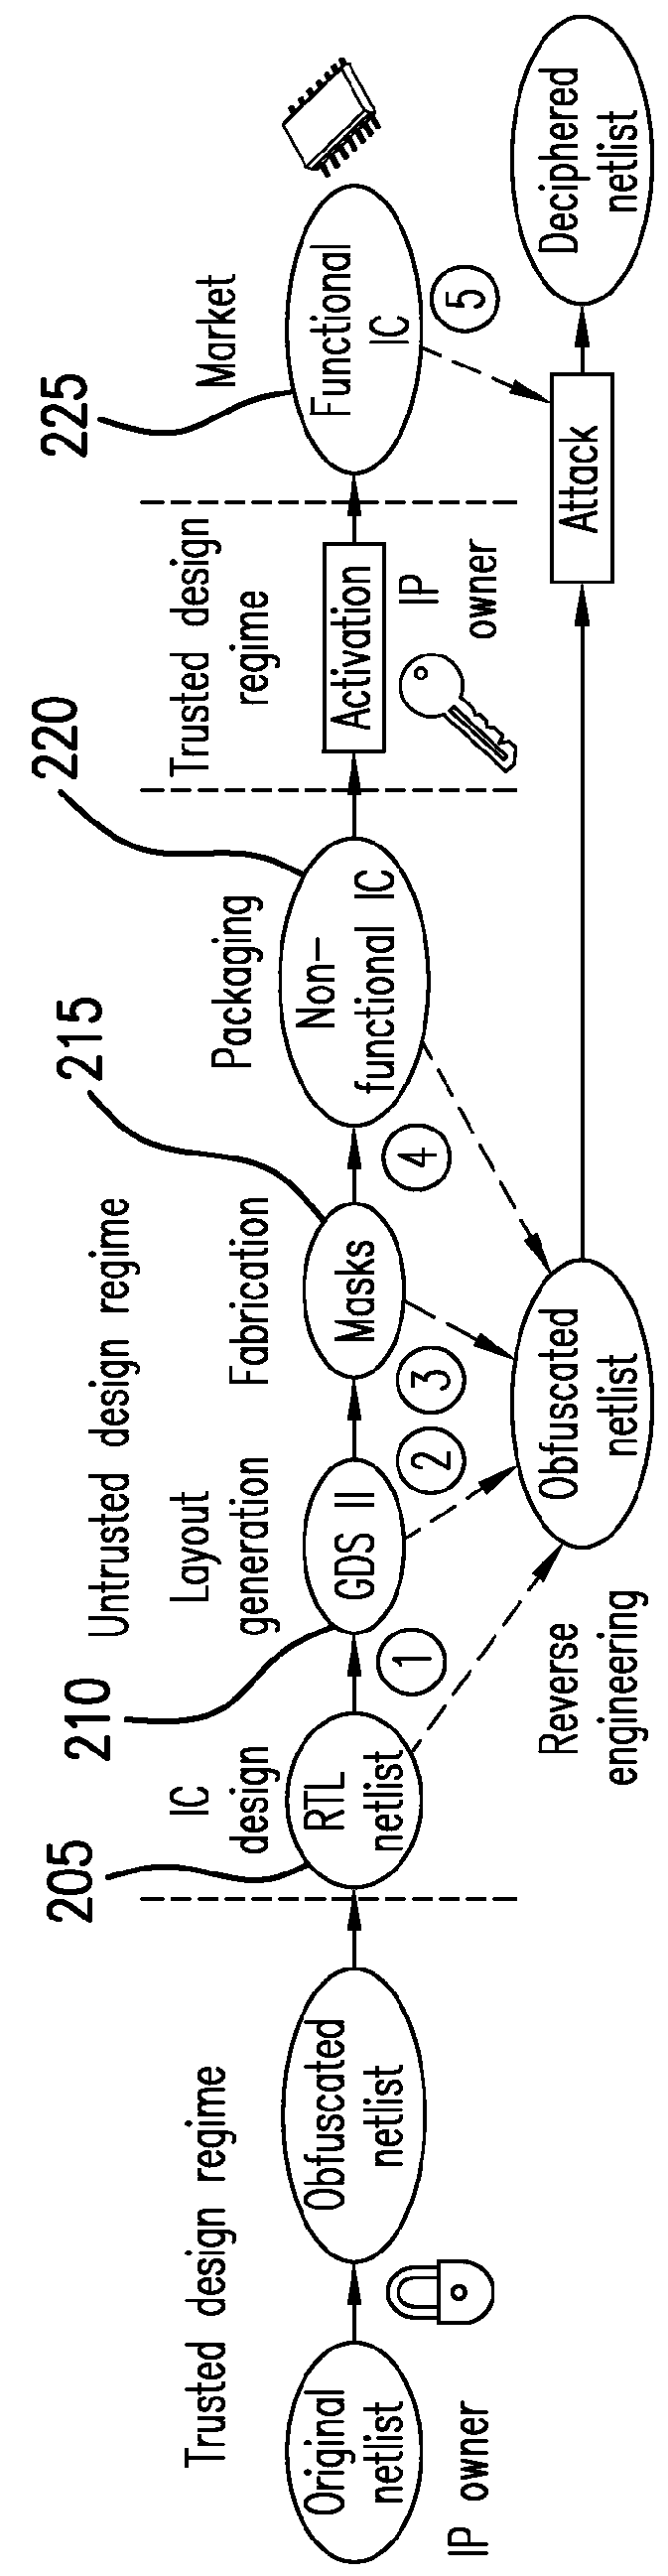 System, method and computer-accessible medium for facilitating logic encryption